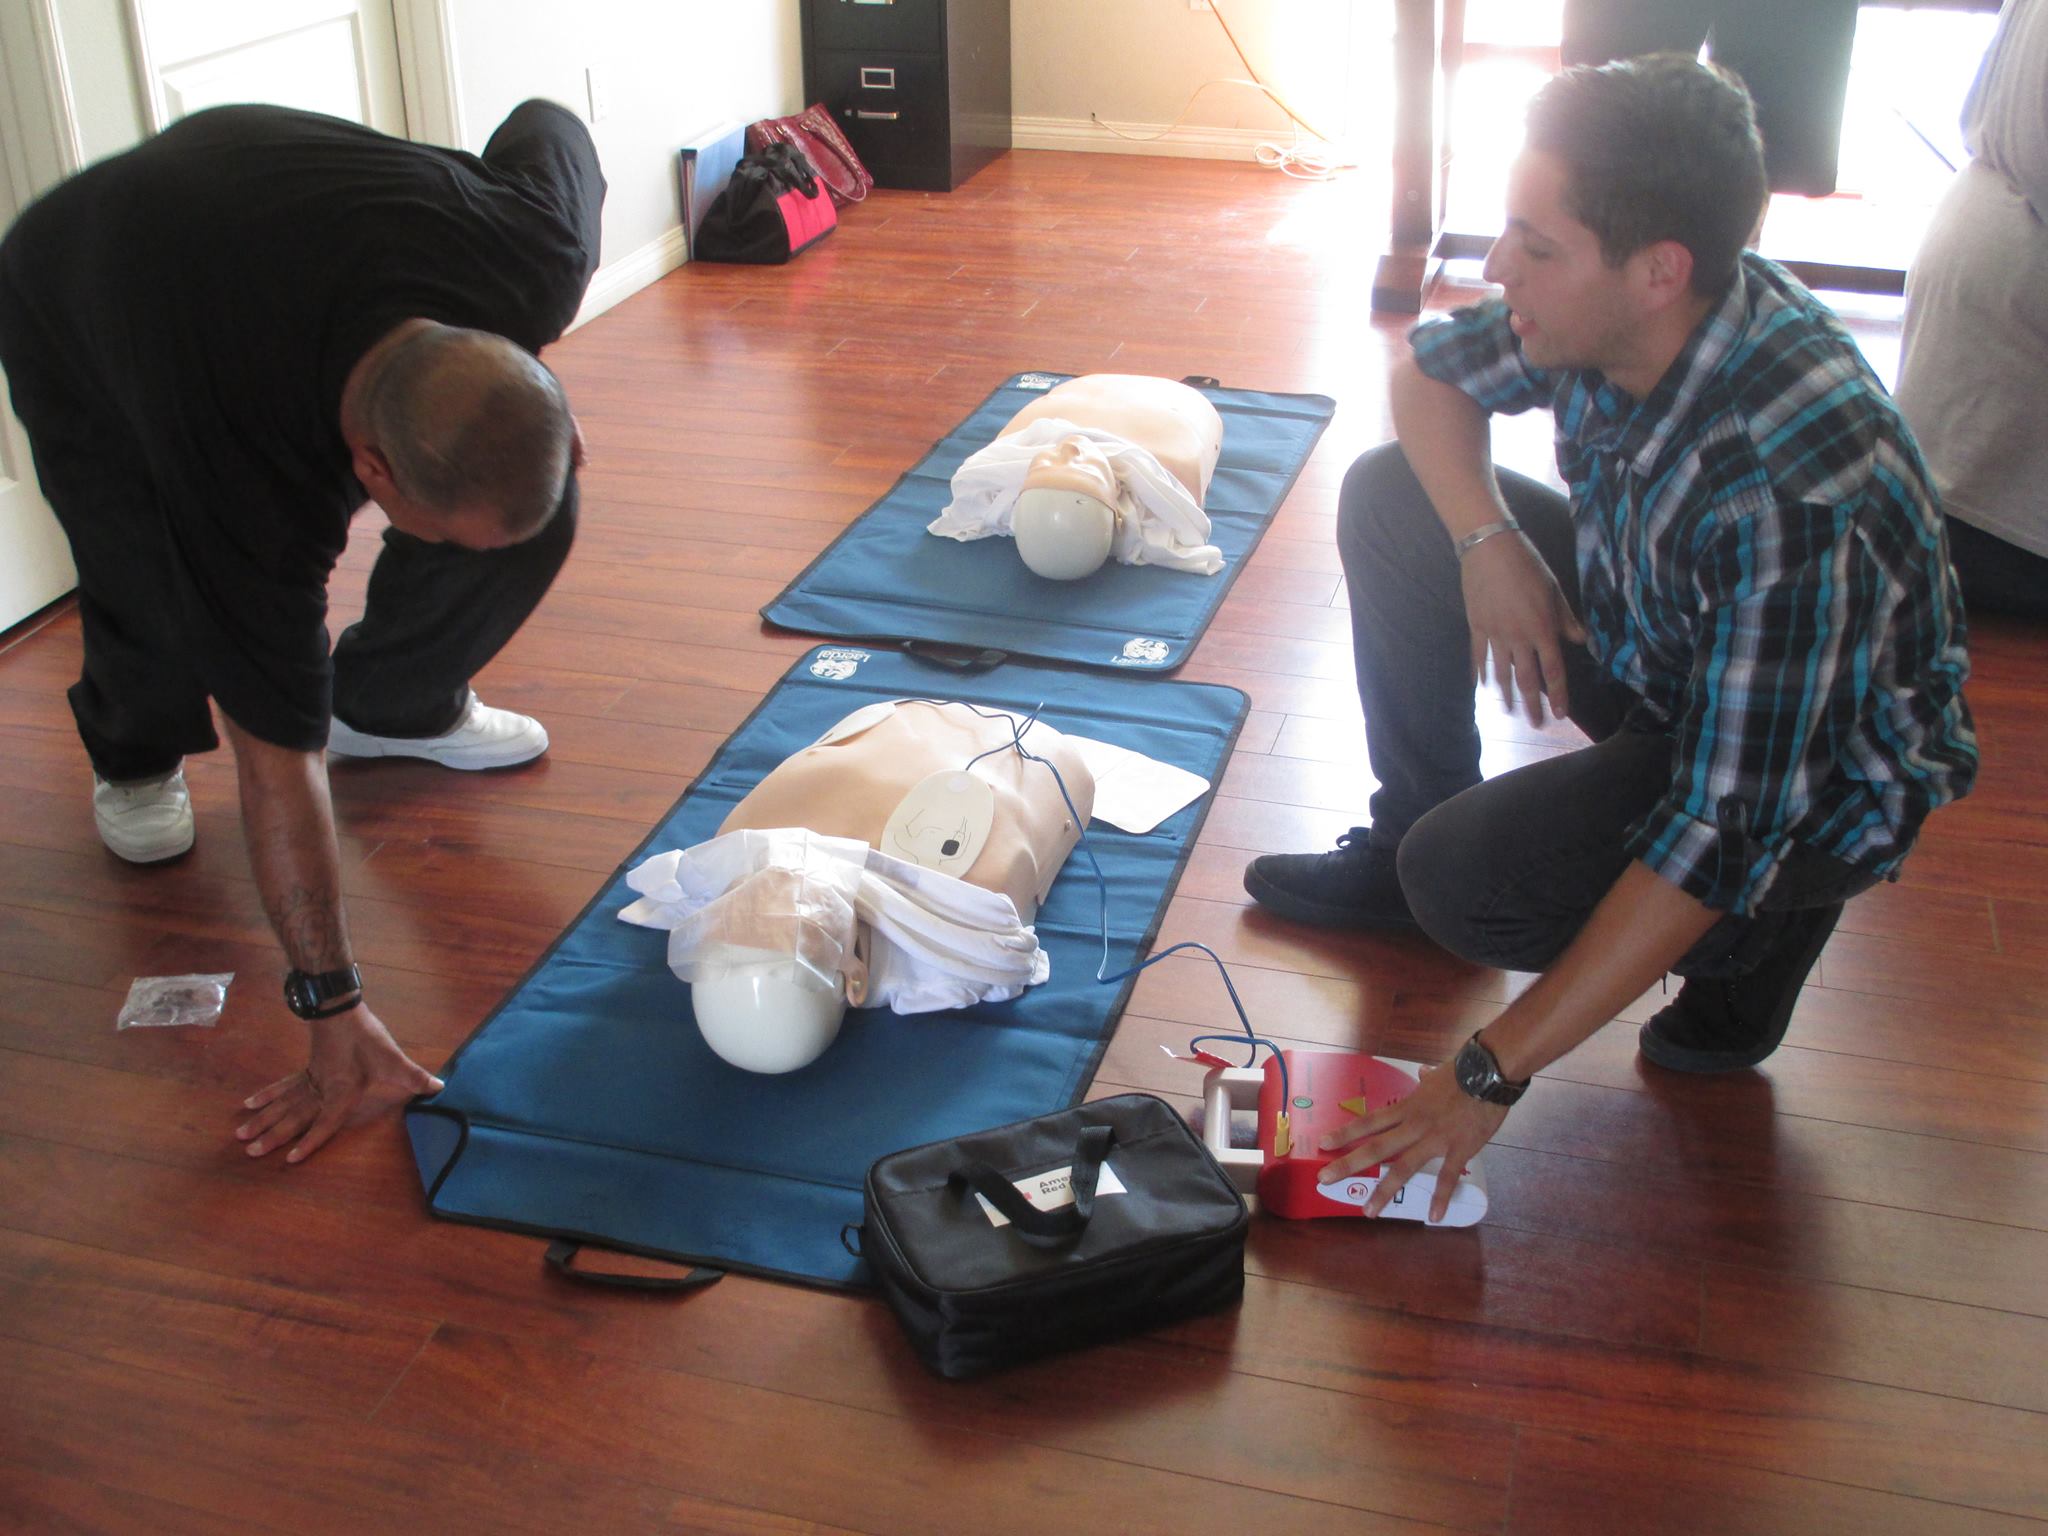 Practicing CPR on a mannequin